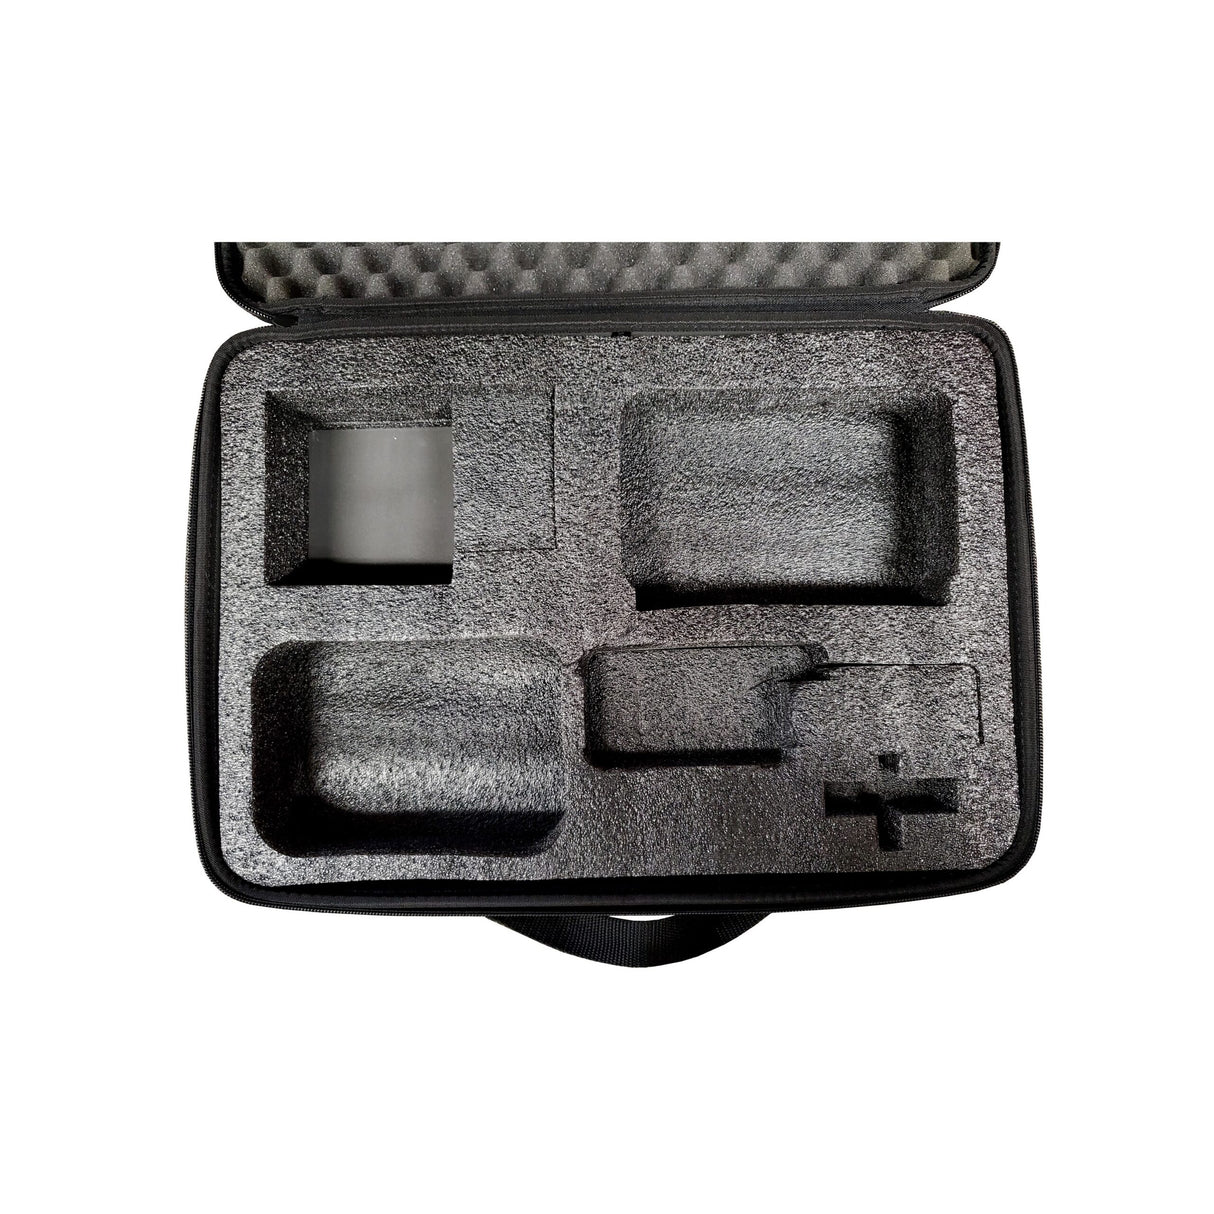 Shure 95E16526 Wireless System Case for PGXD, GLXD and Some BLX Systems with Bodypack Transmitters